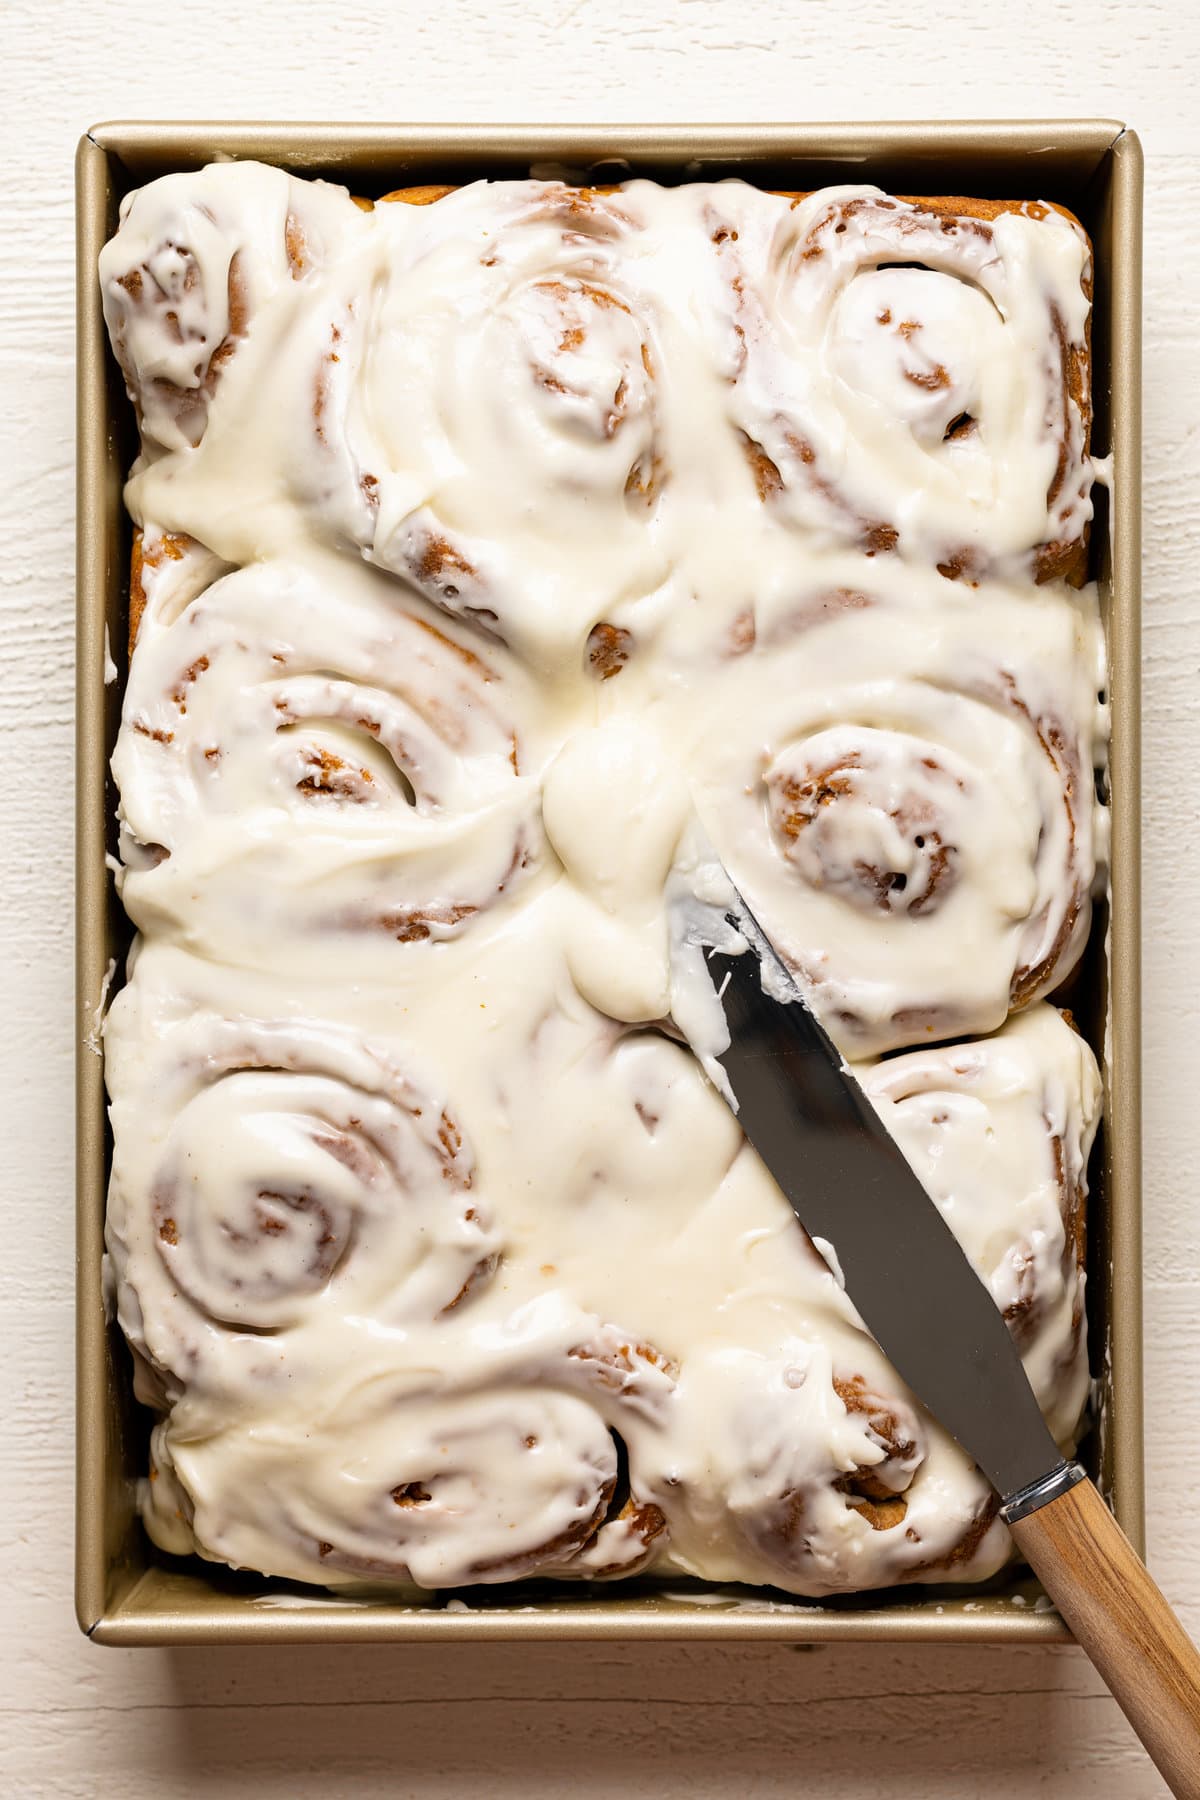 Knife spreading frosting on Southern-Style Carrot Cake Cinnamon Rolls